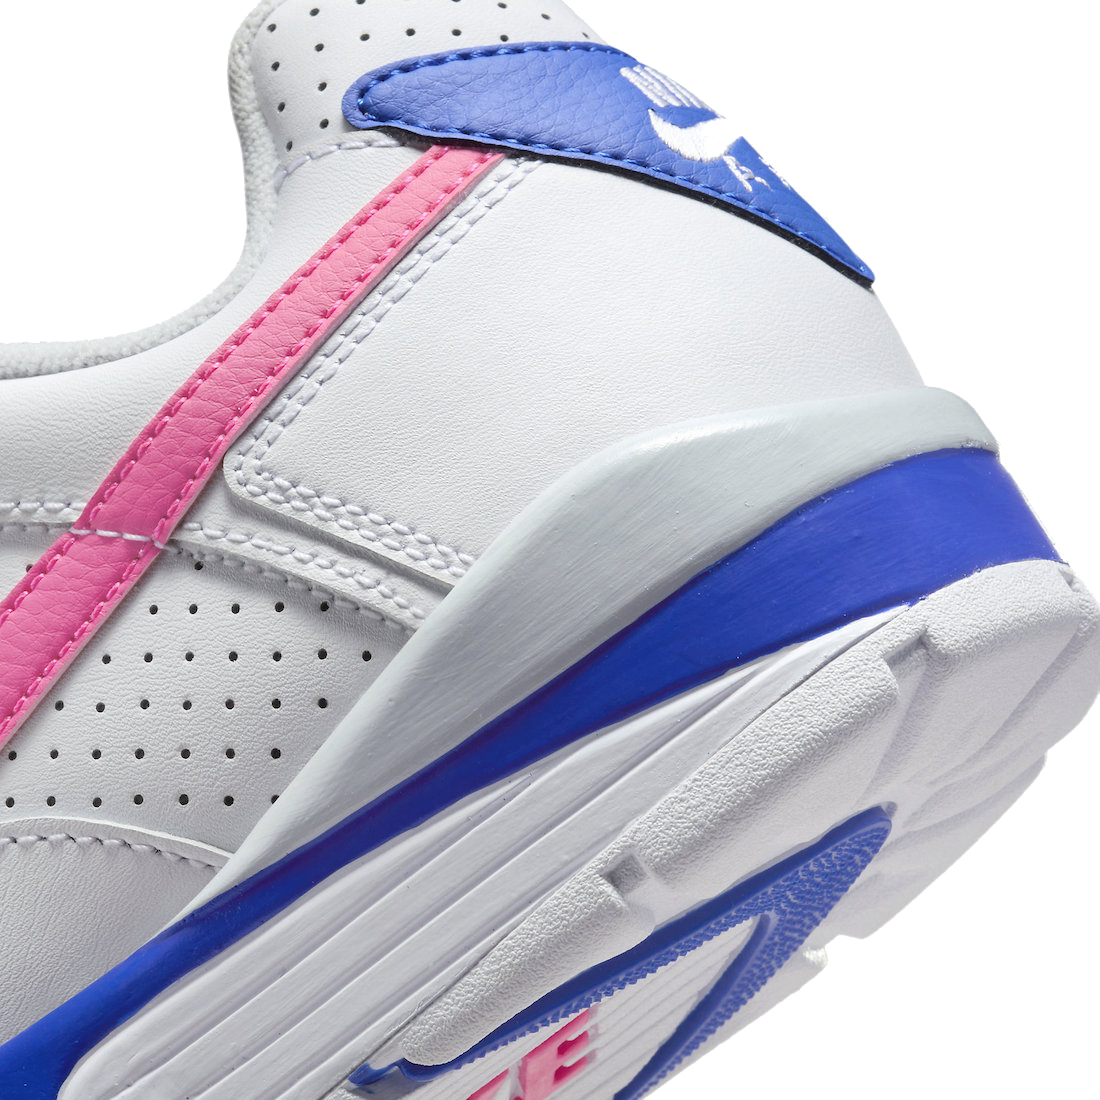 Nike Air Cross Trainer 3 Low White Hyper Pink FN6887-100